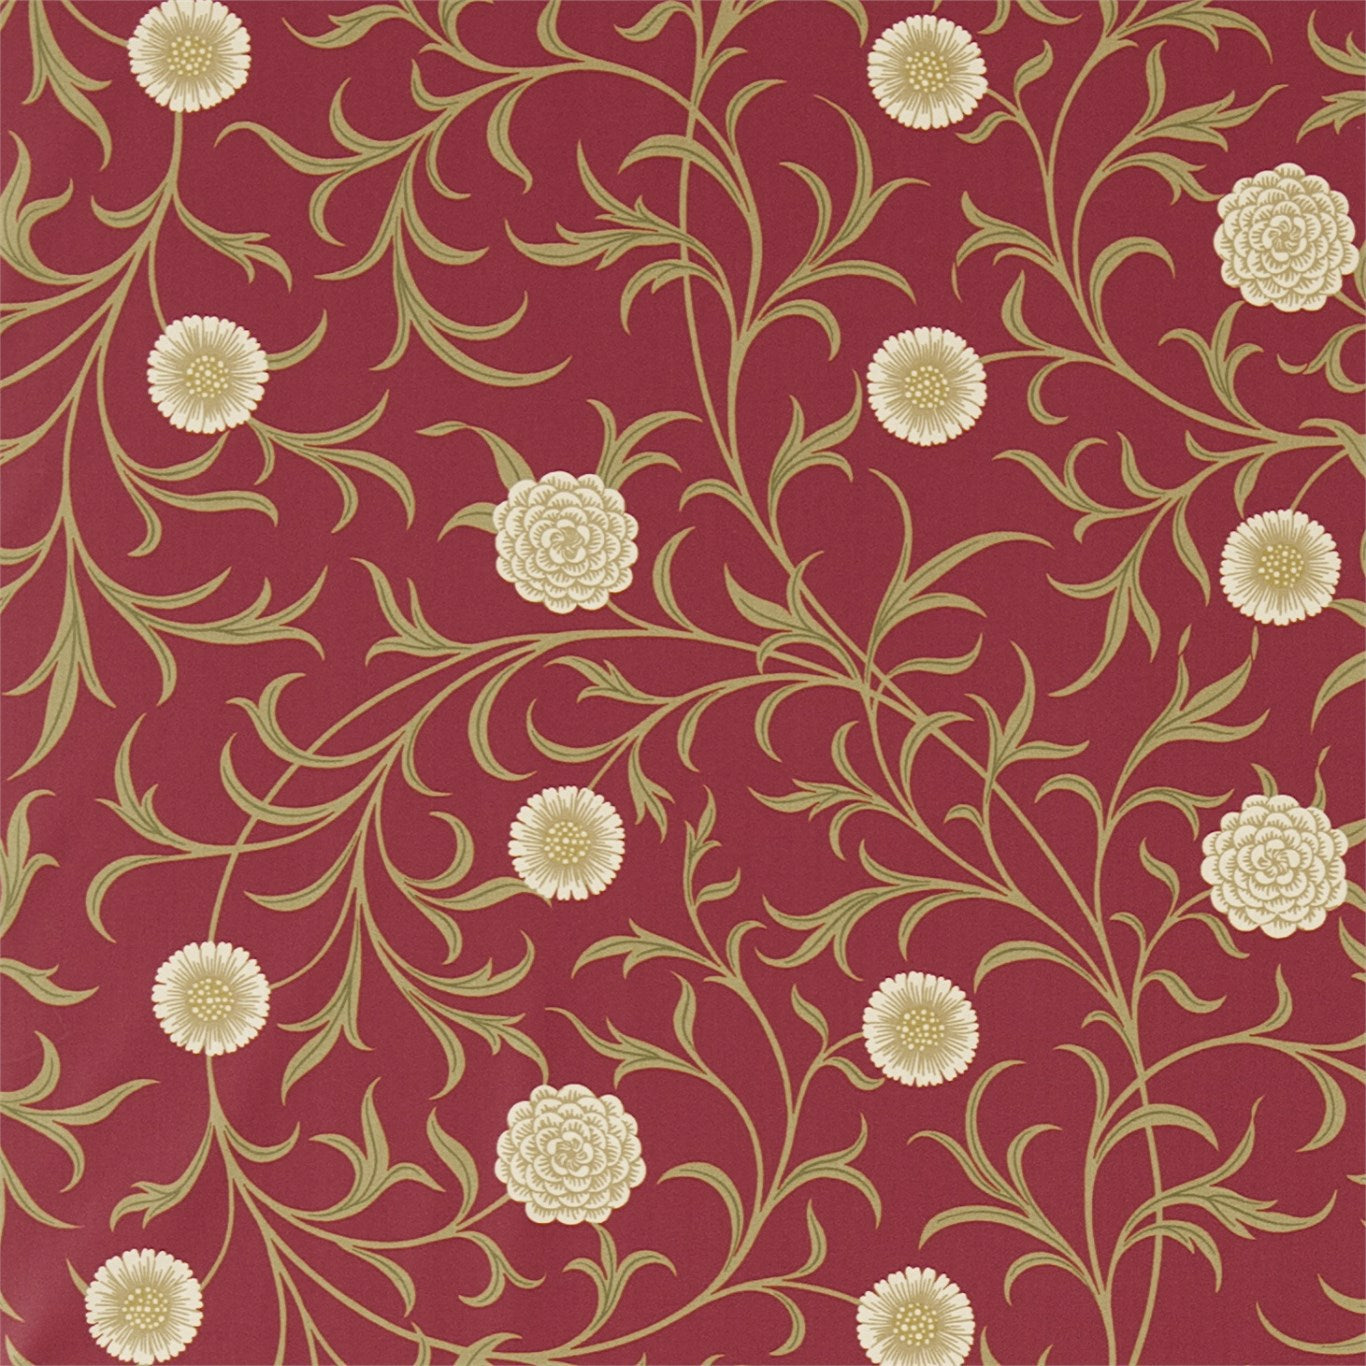 Scroll Fabric by Morris & Co.